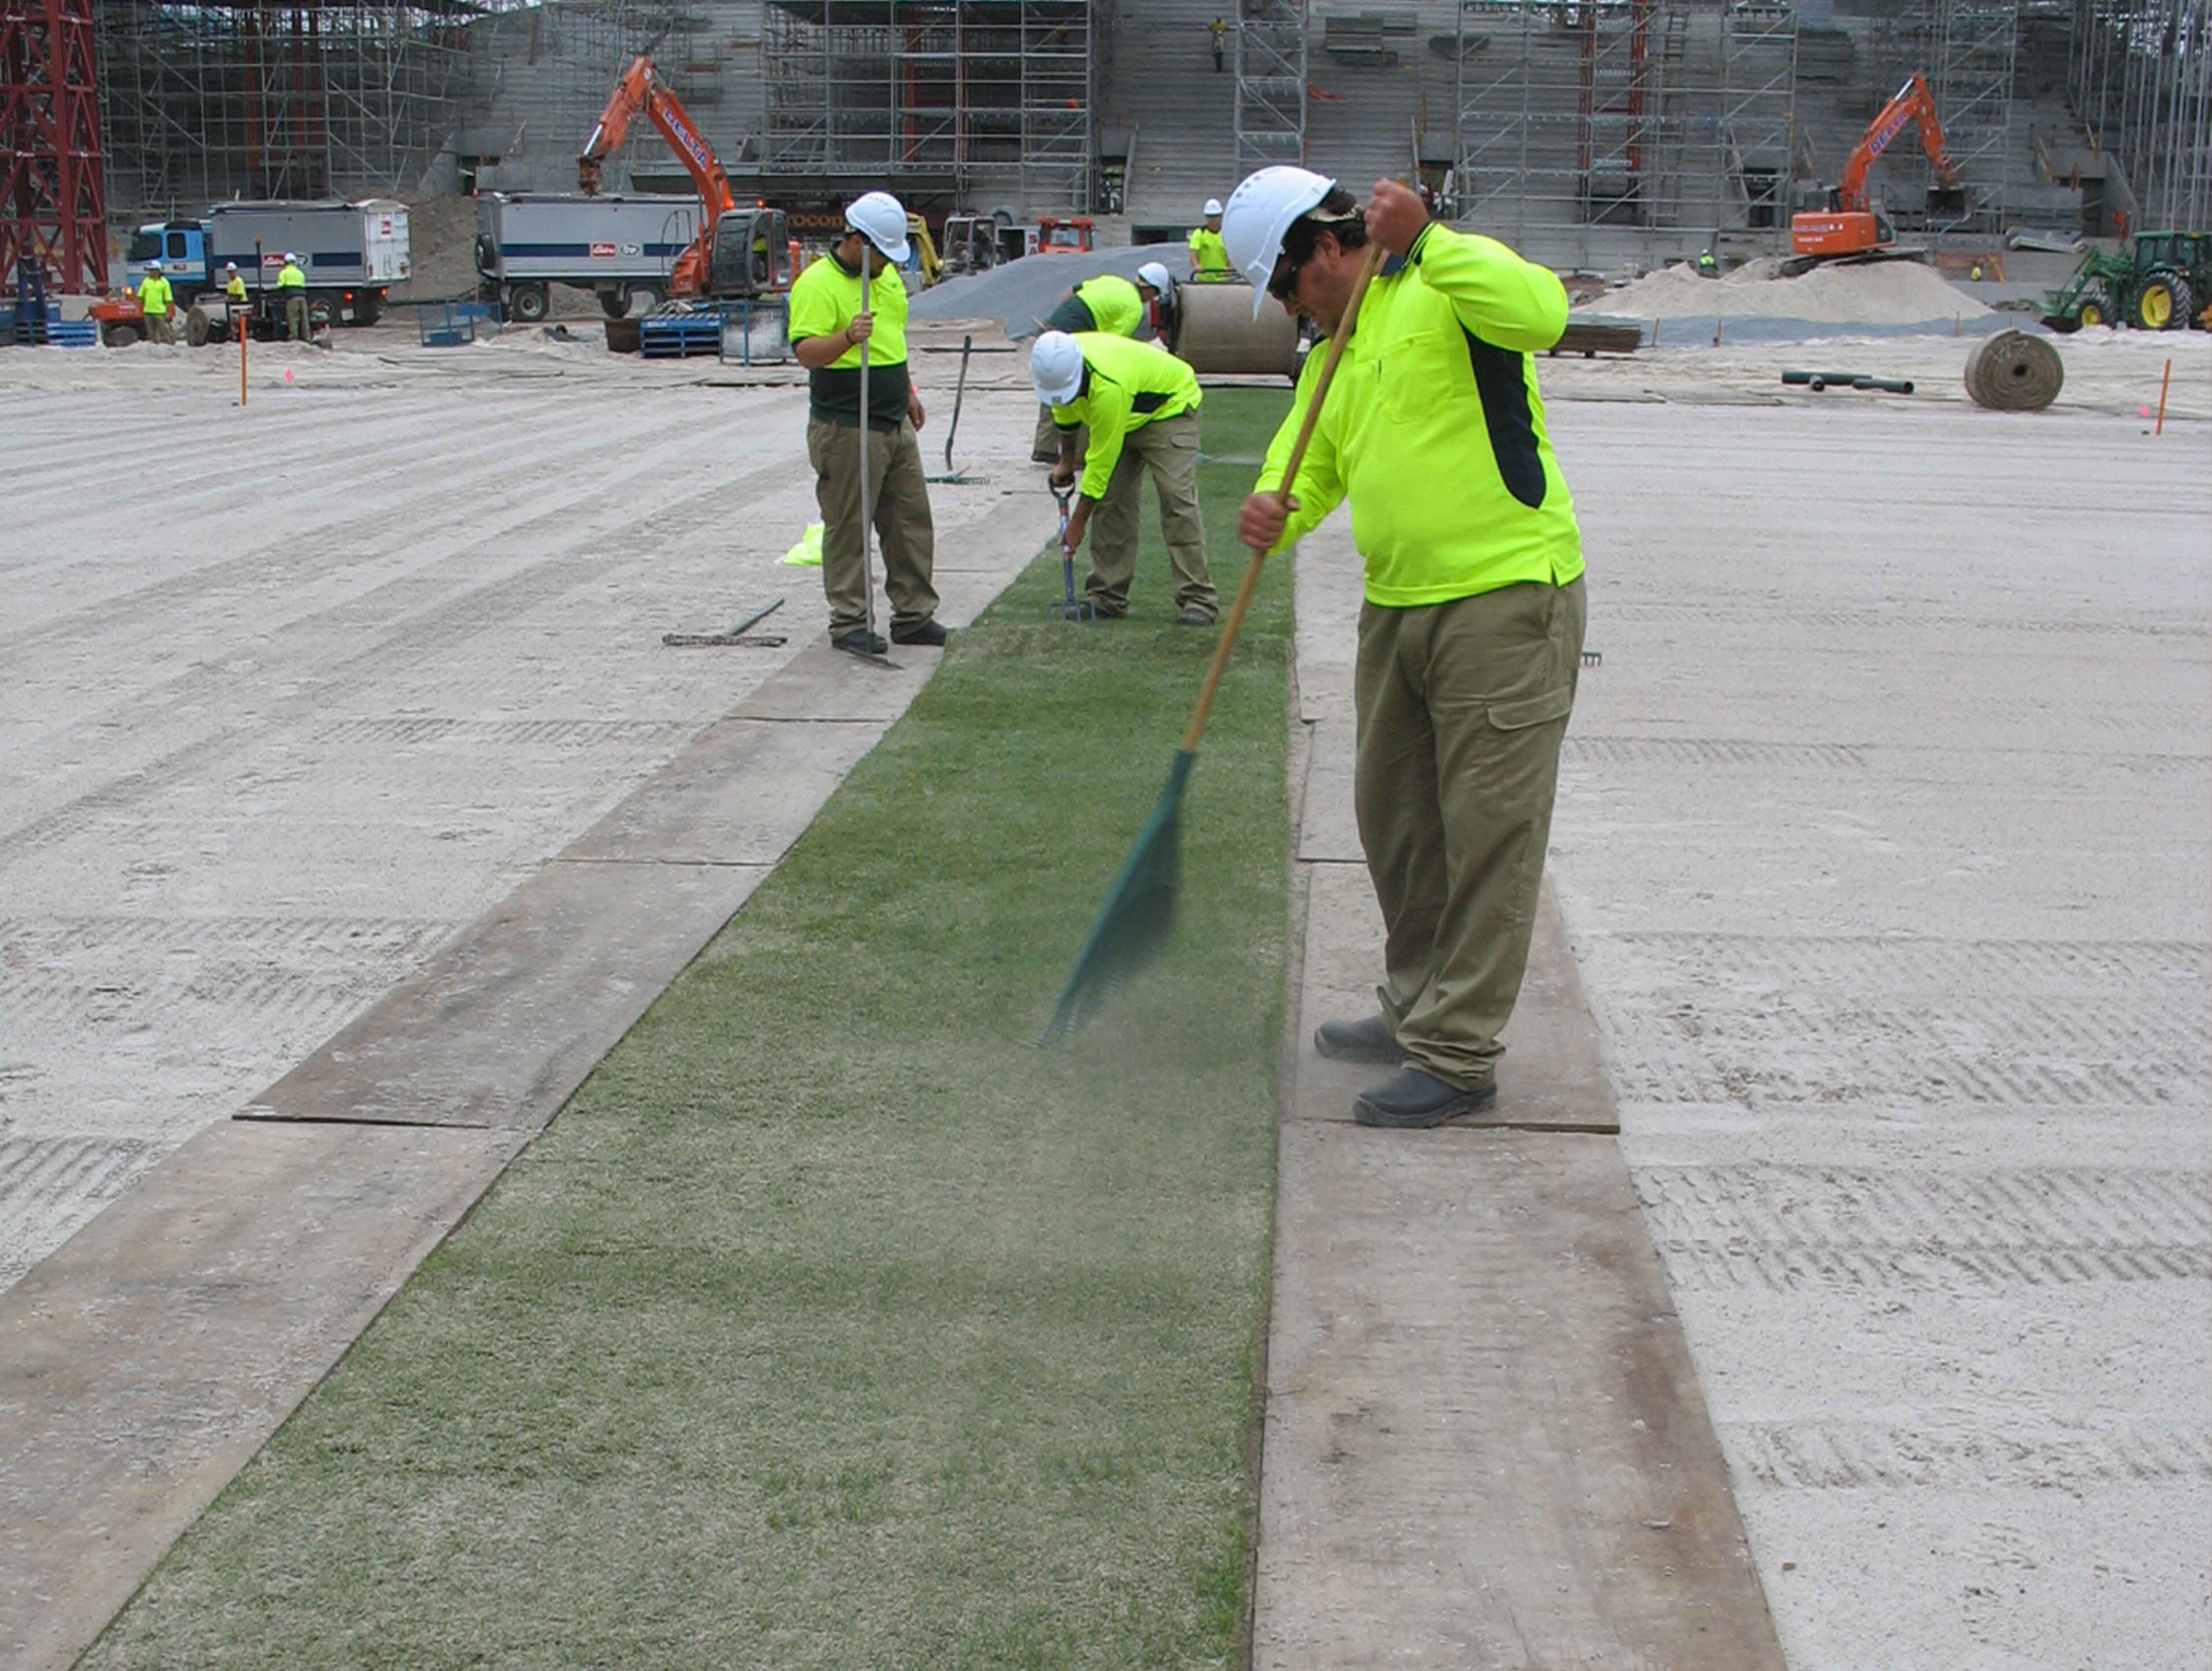 Workers maintening a line of natural turf just being installed on a sport stadium surface